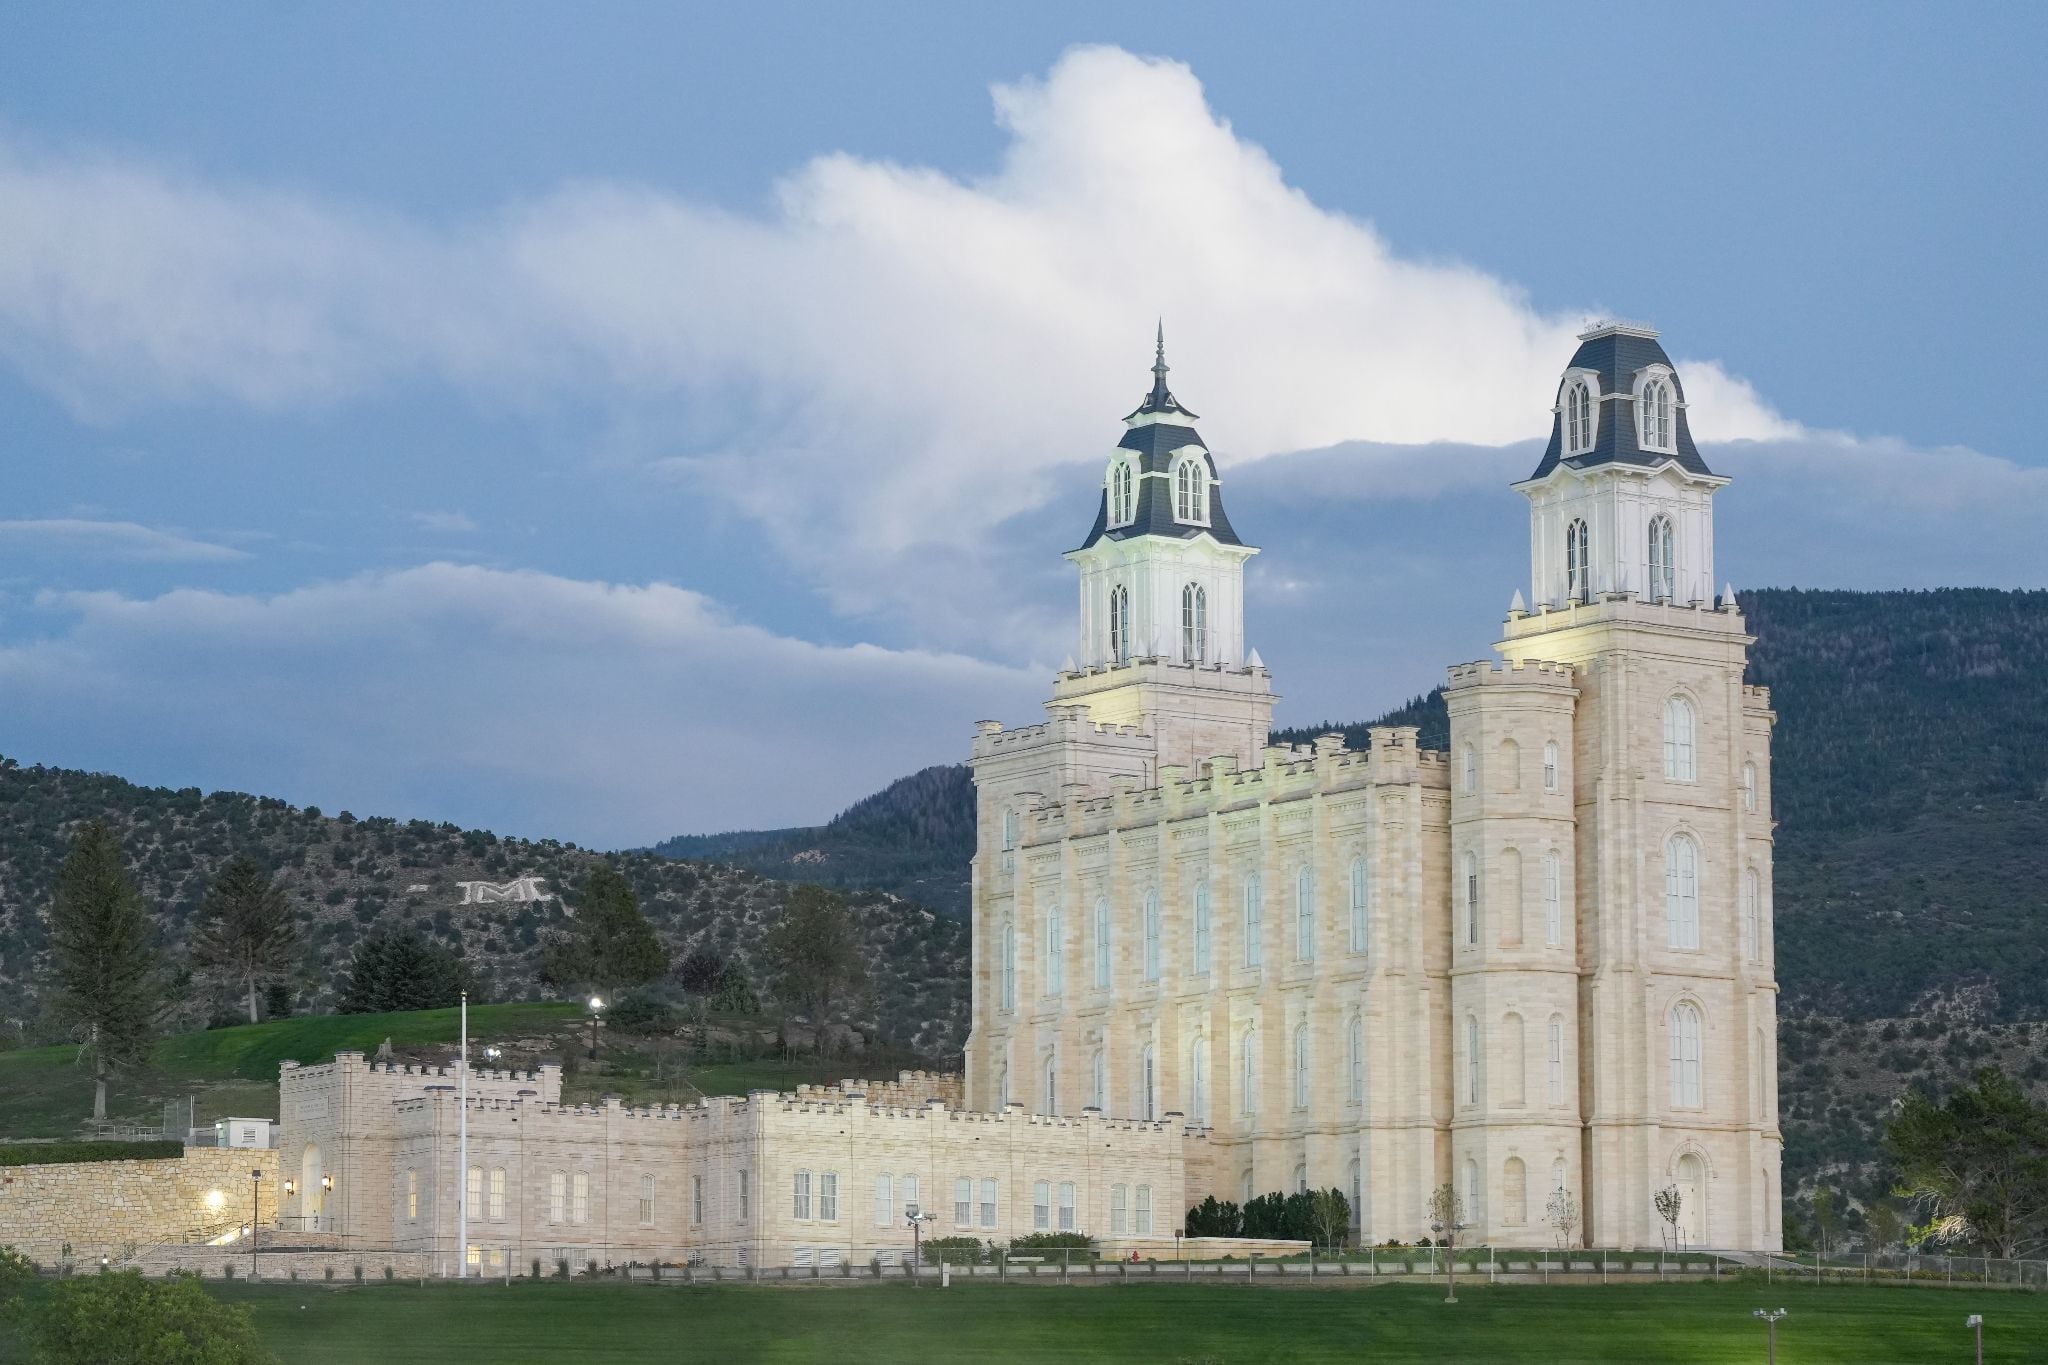 (The Church of Jesus Christ of Latter-day Saints) The Manti Utah Temple is one of 30 existing and planned temples in the Beehive State, home to more than 2 million Latter-day Saints.